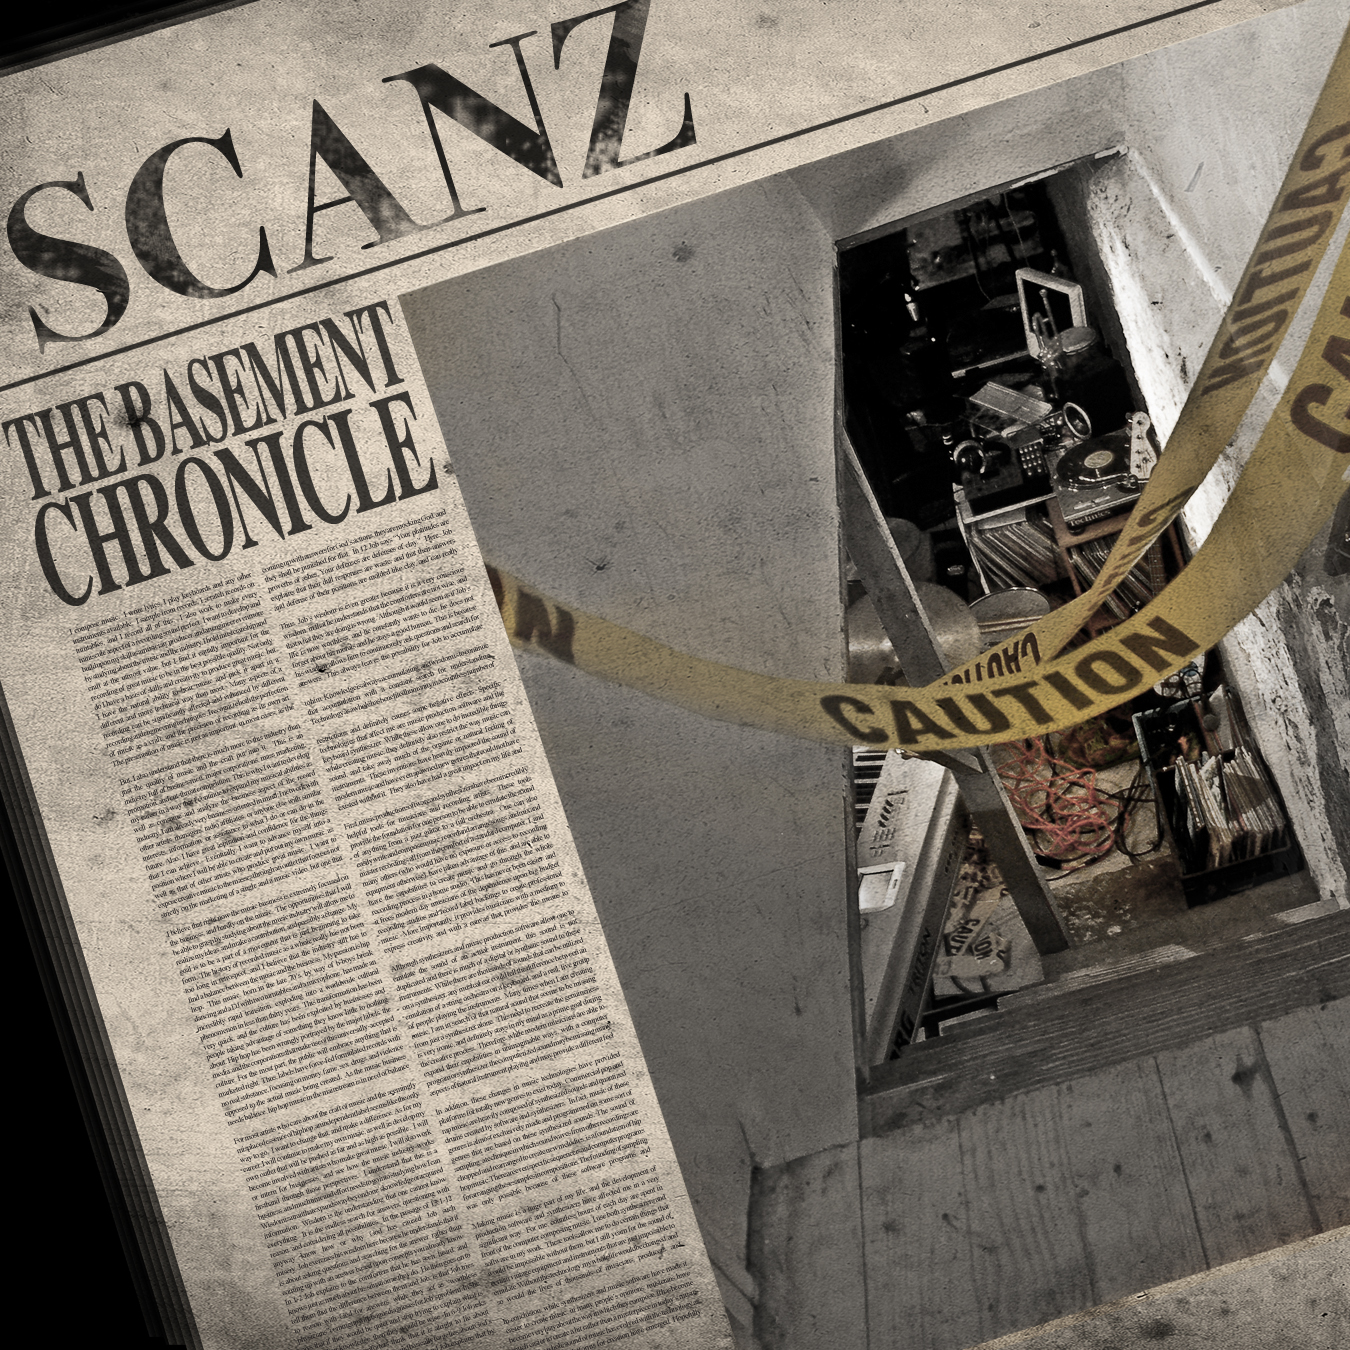 scanz basement chronicle album cover